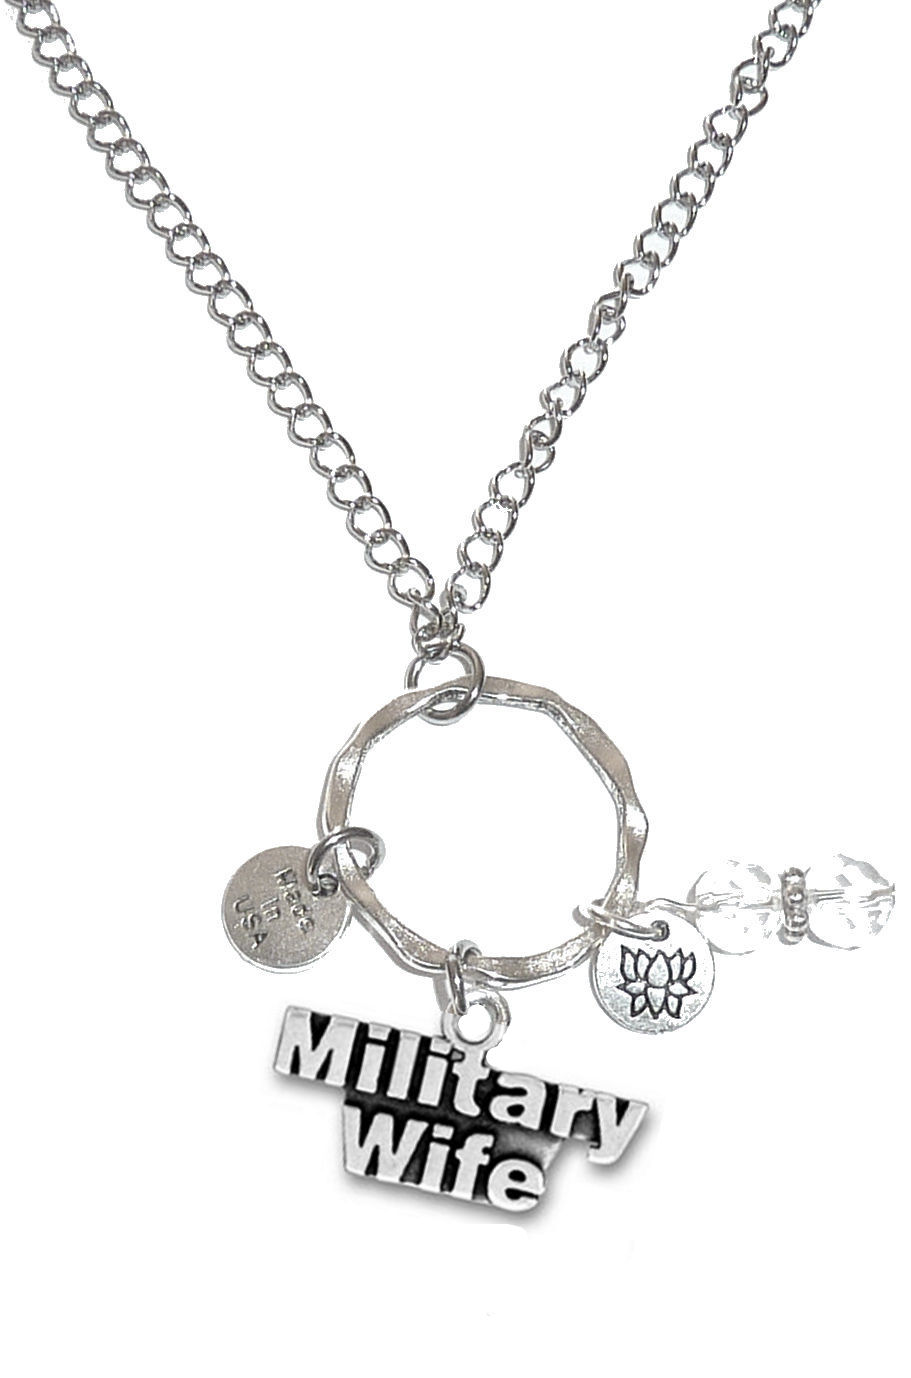 Military Wife Charm Rear View Mirror Ornament